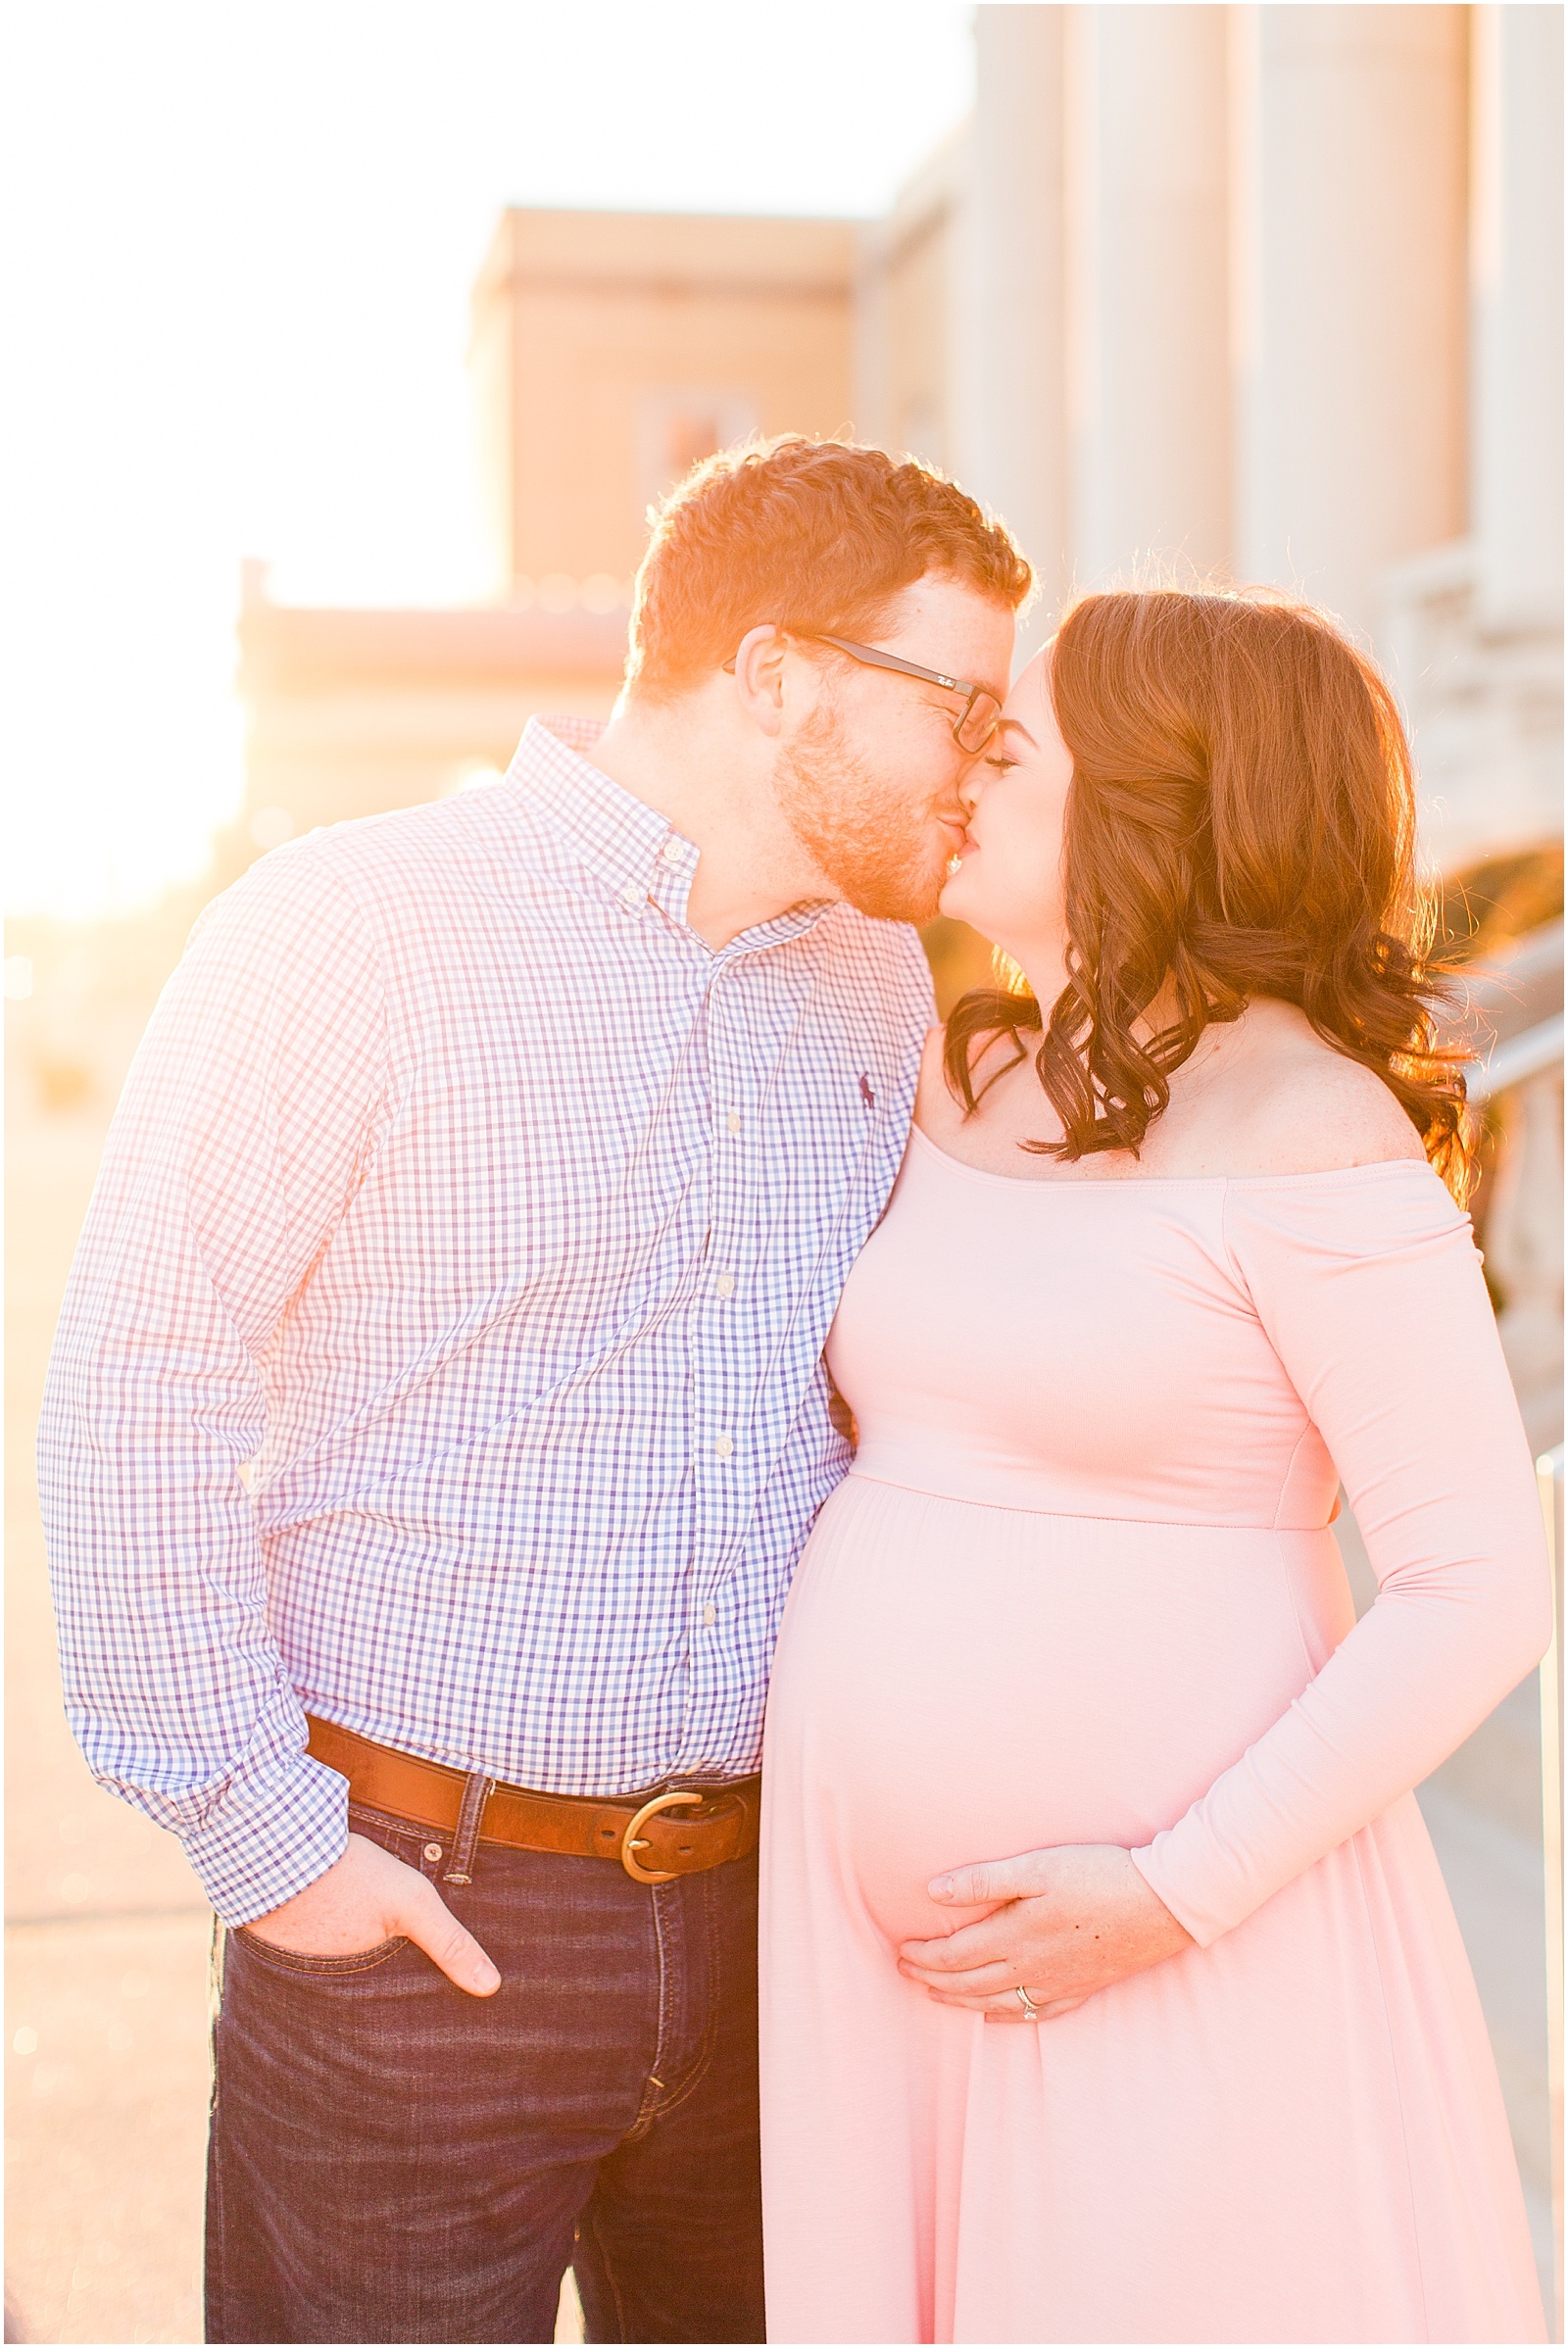 A Downtown Owensboro Maternity Session | Kayla and Grant Evansville Indiana Wedding Photographers-0005.jpg